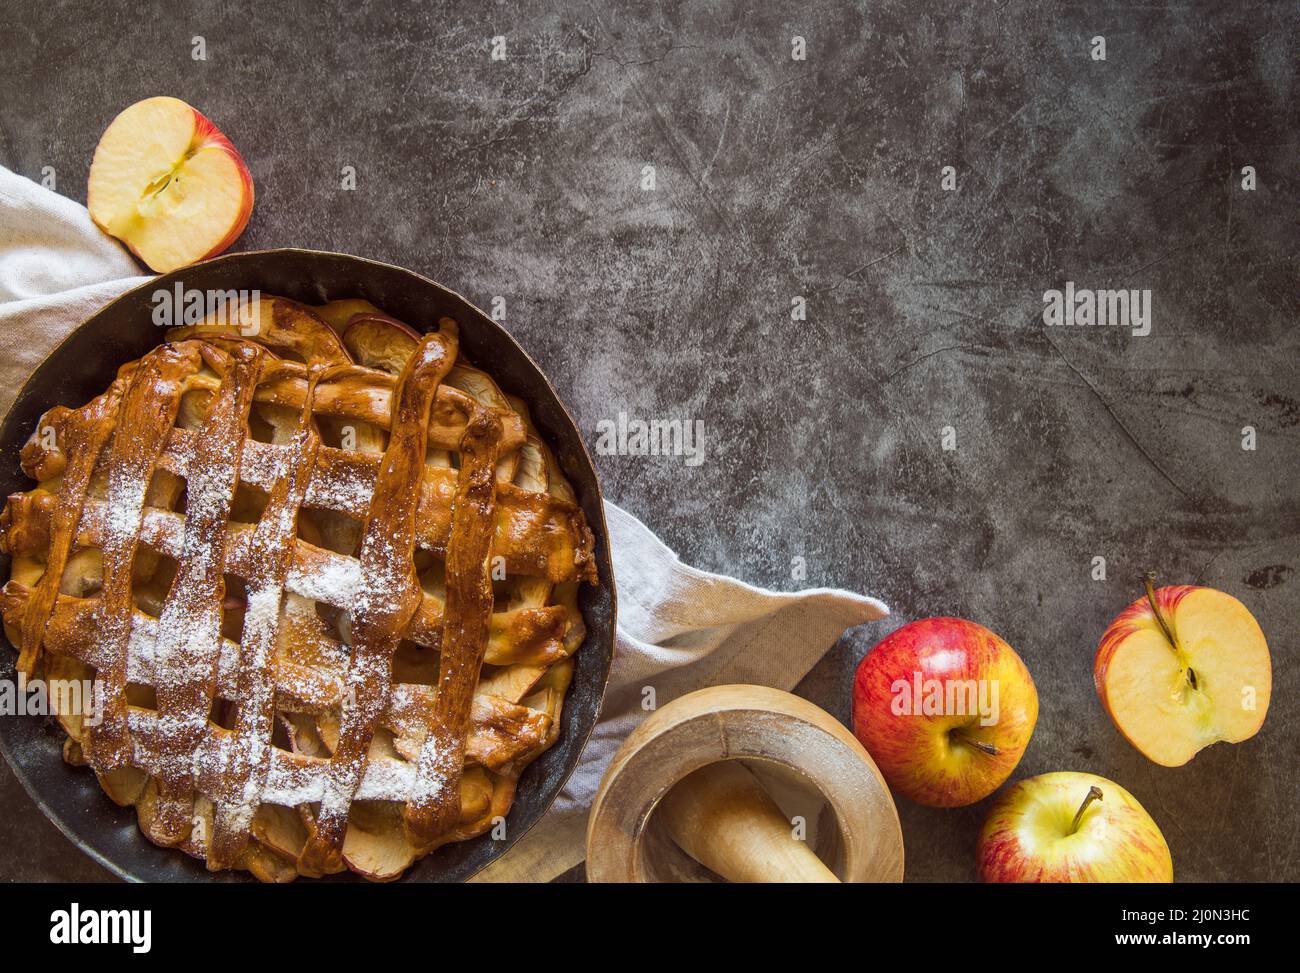 Baked apple pie wooden table with fruit Stock Photo